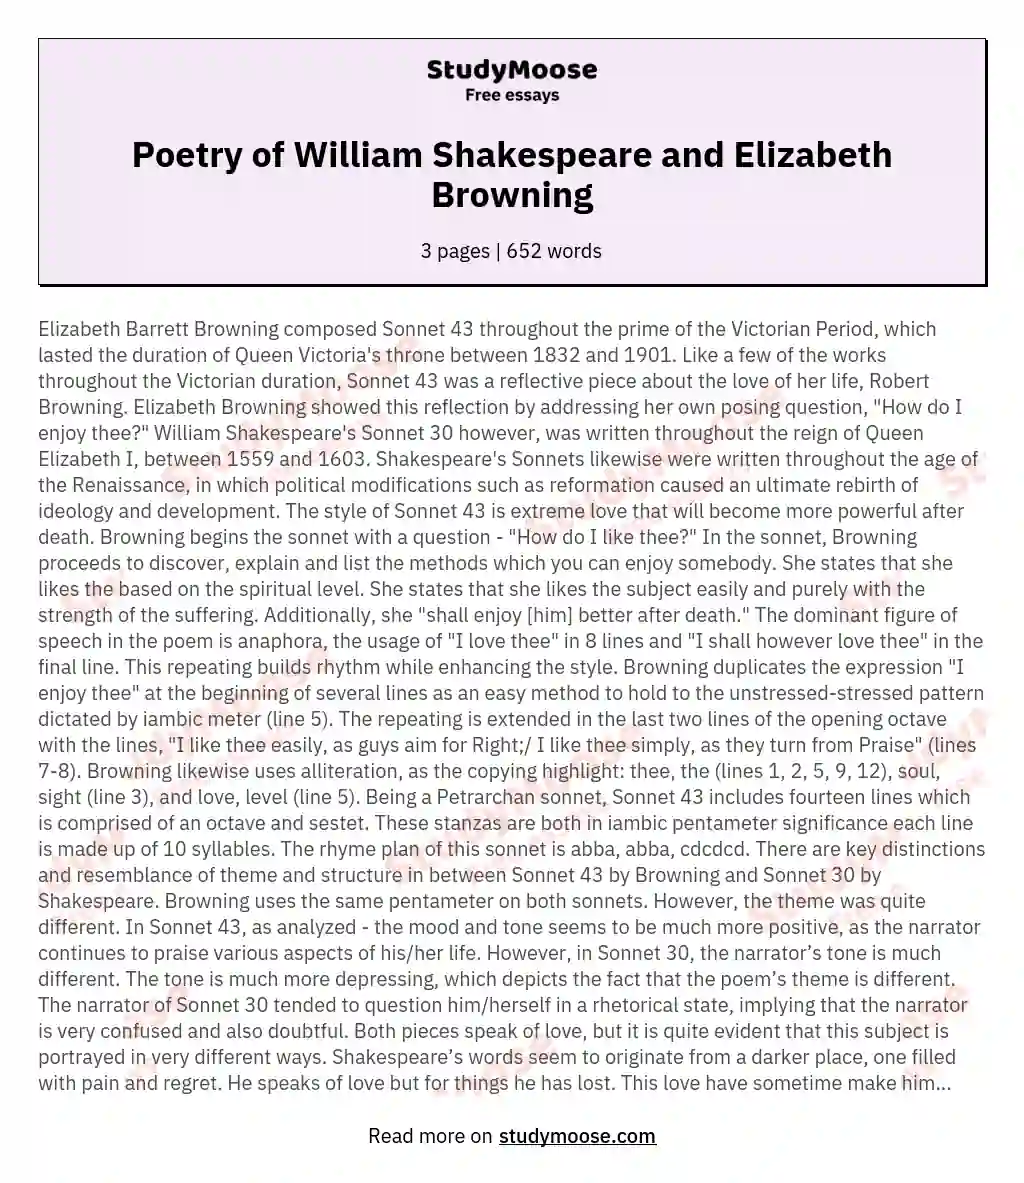 Poetry of William Shakespeare and Elizabeth Browning